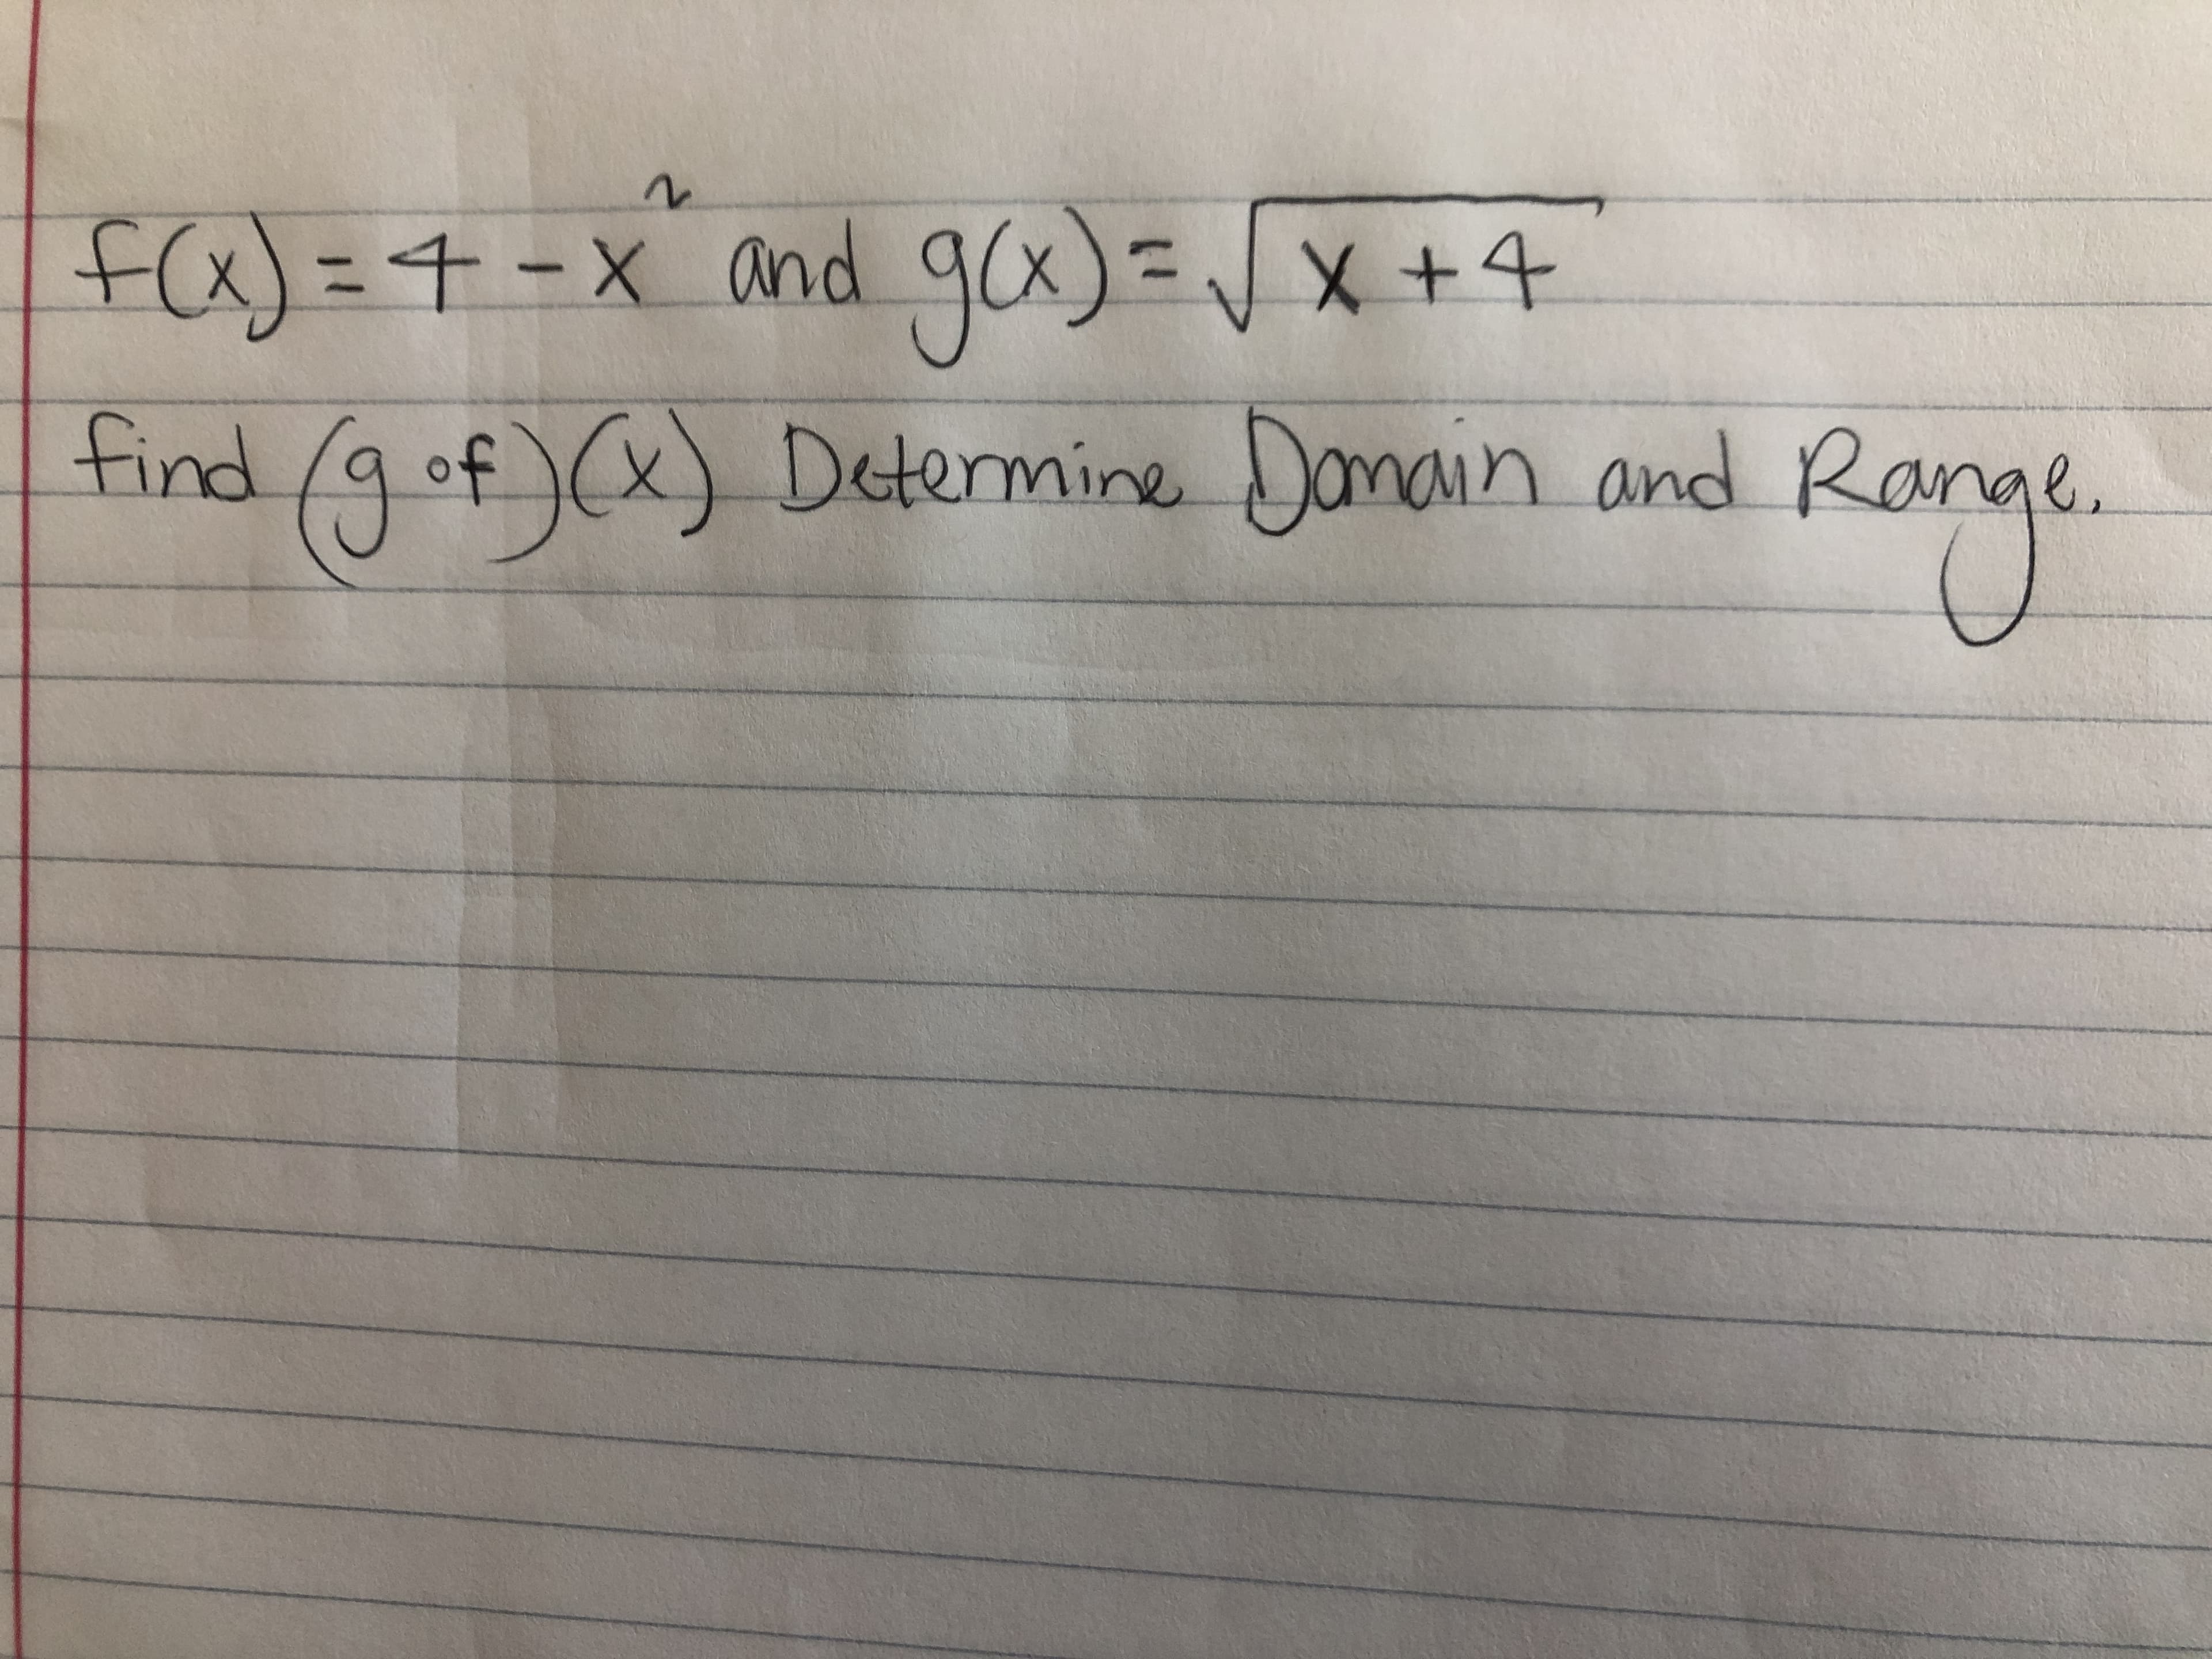 f(x)=4-x and
gox)=DVx+4
%3D
find/9o
(9of)(x) Detemine Damain and Ran
nge.
2.
